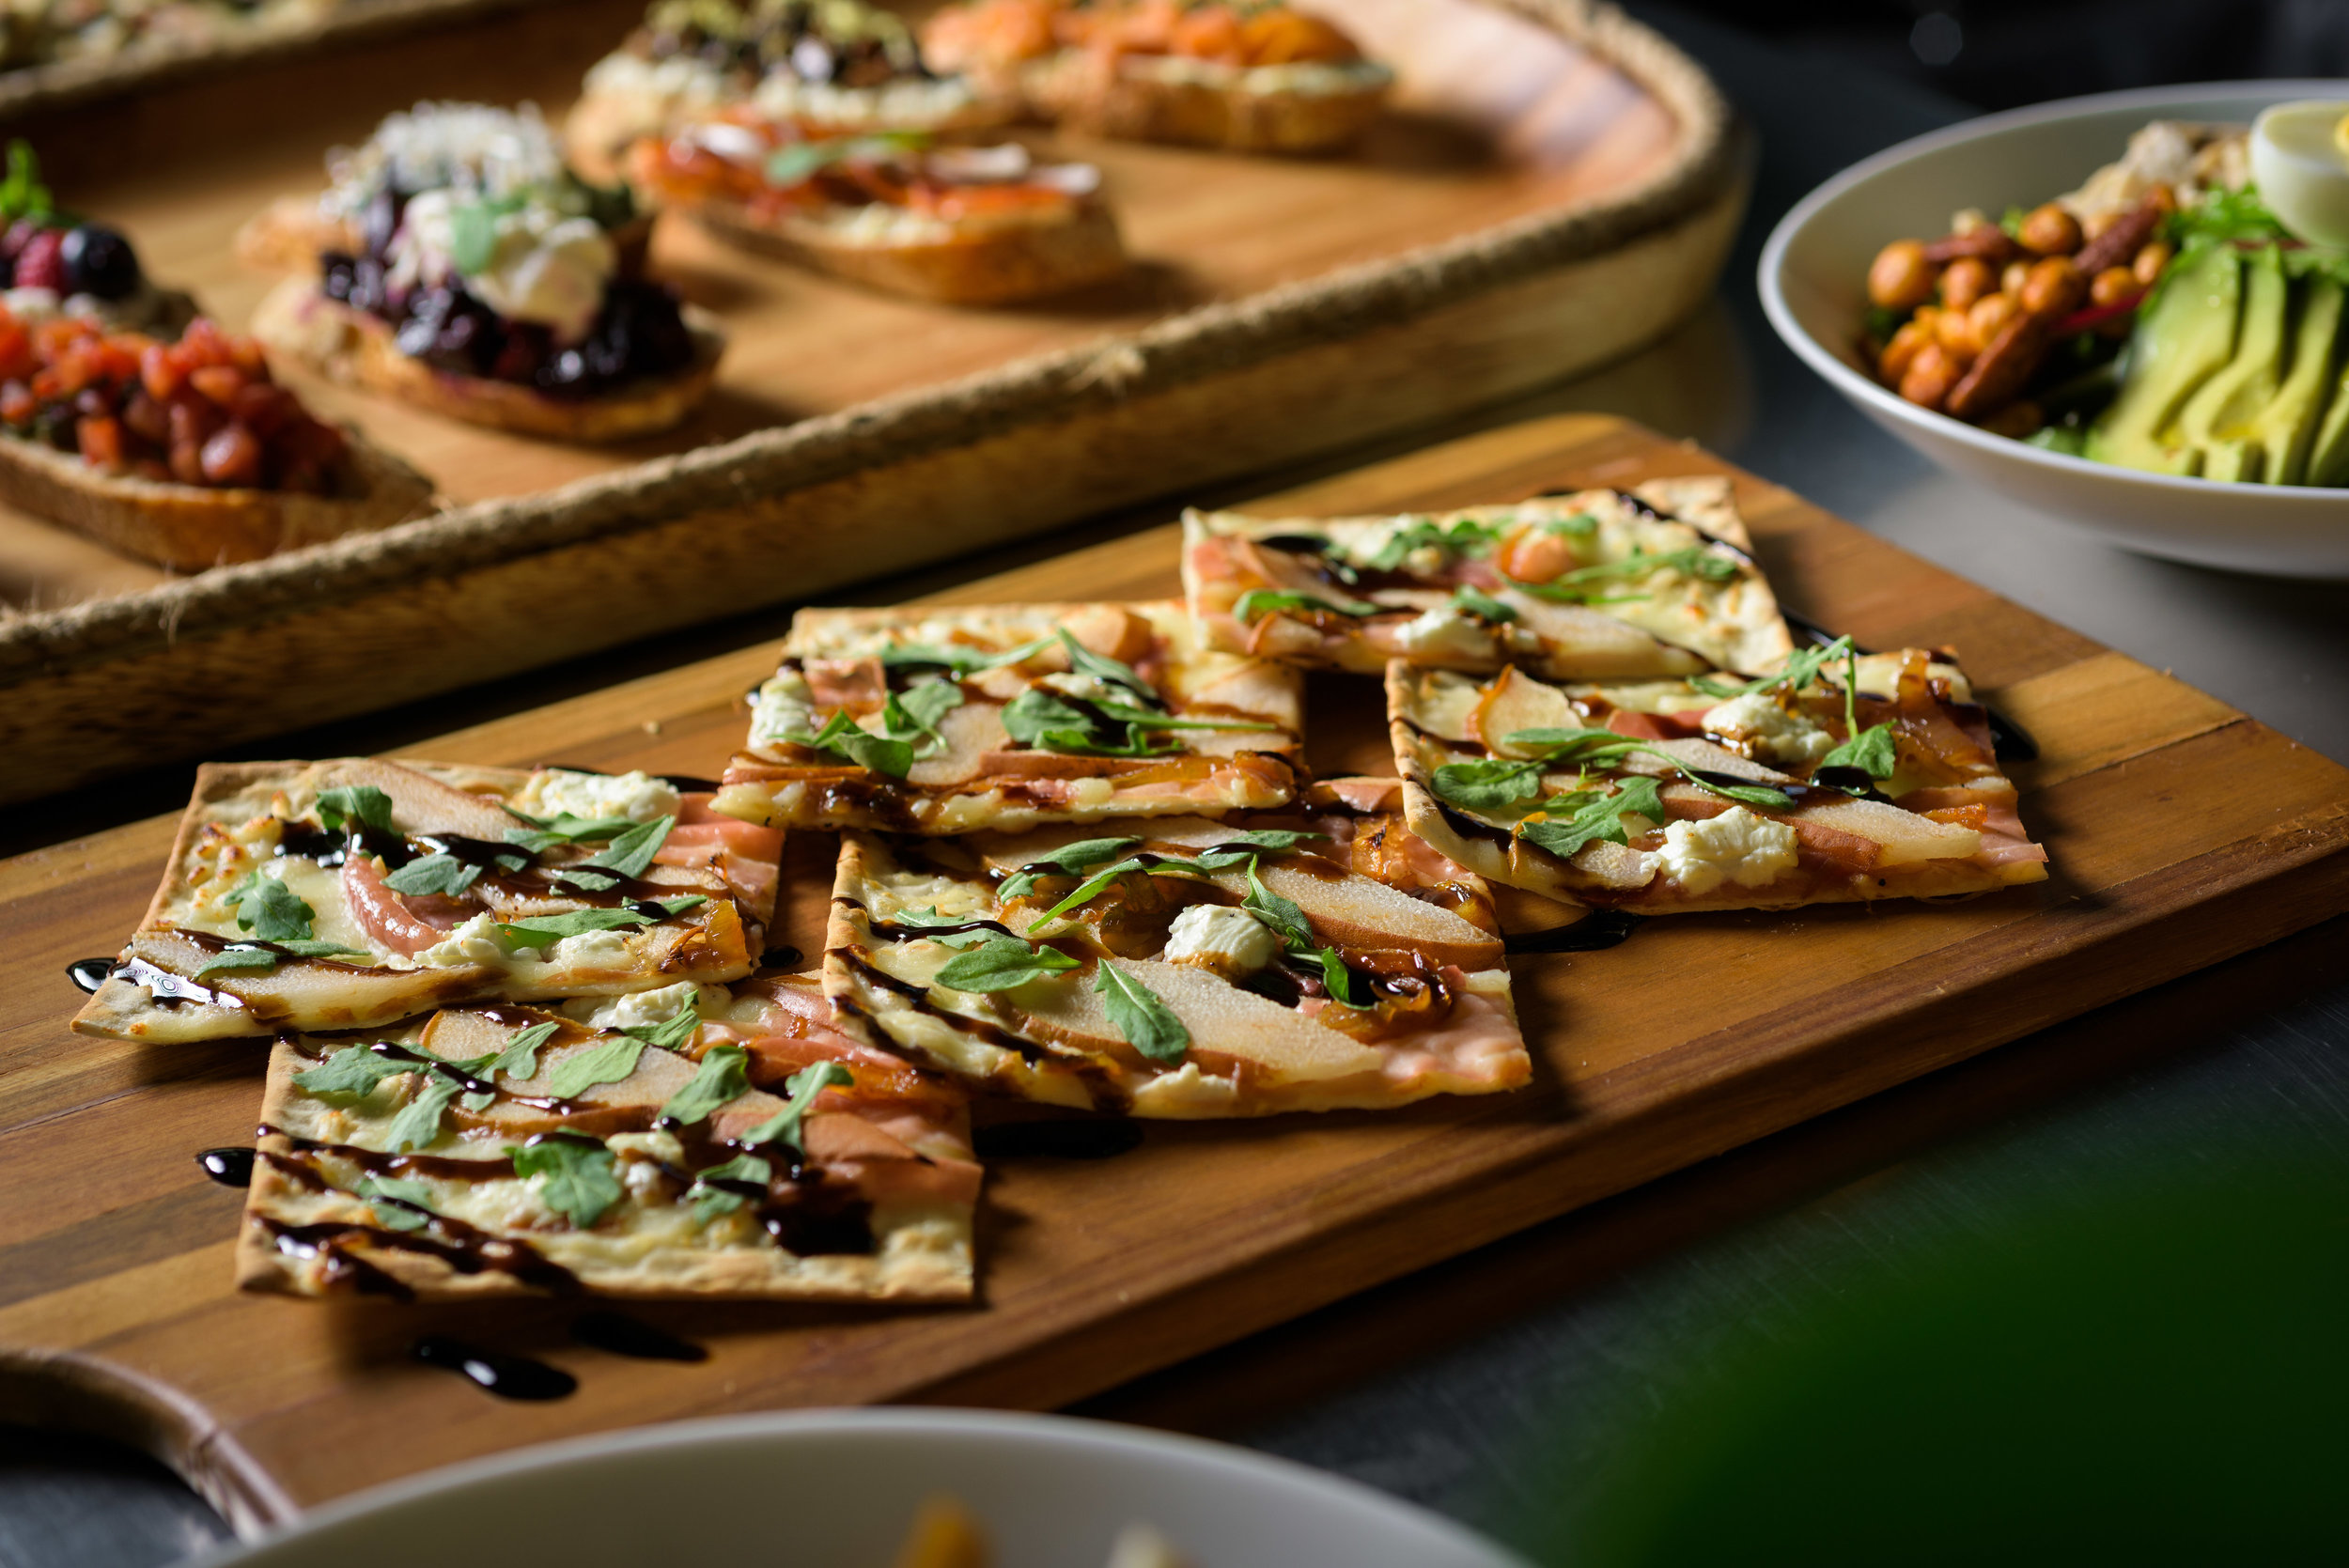 flatbread and other food – cupertino food photos at rootstock wine bar - photos by bay area commercial photographer chris schmauch